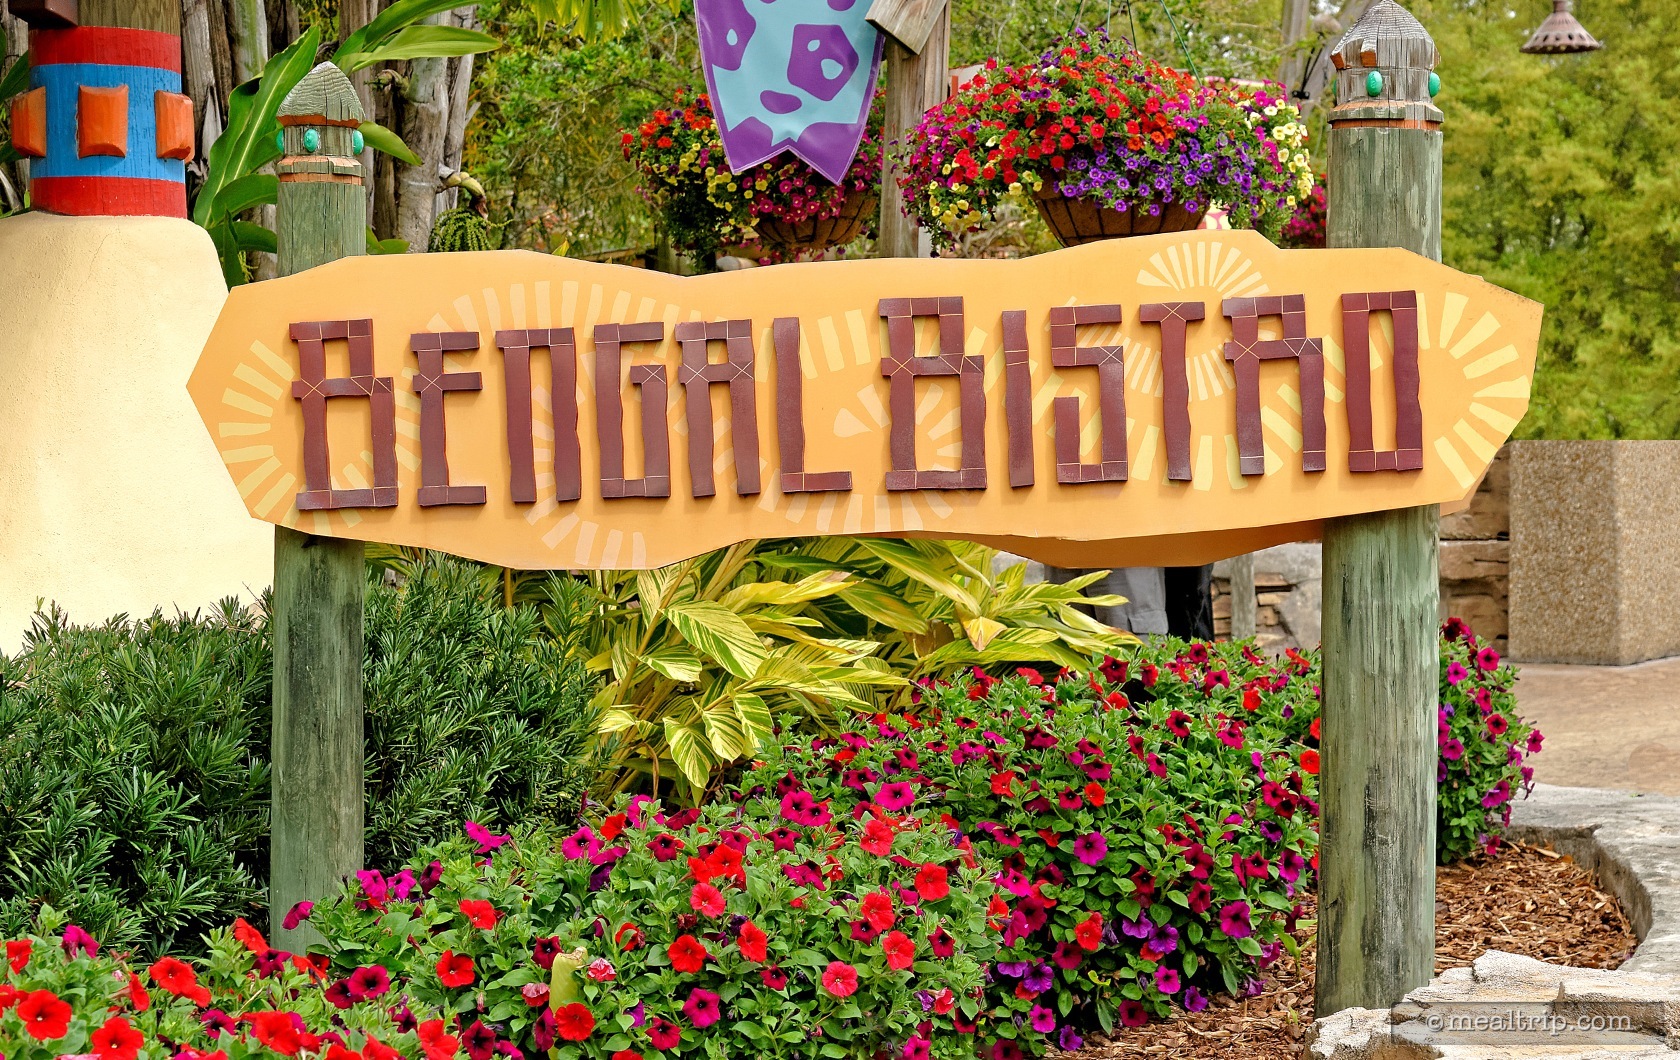 Photo Gallery For Bengal Bistro At Busch Gardens Tampa